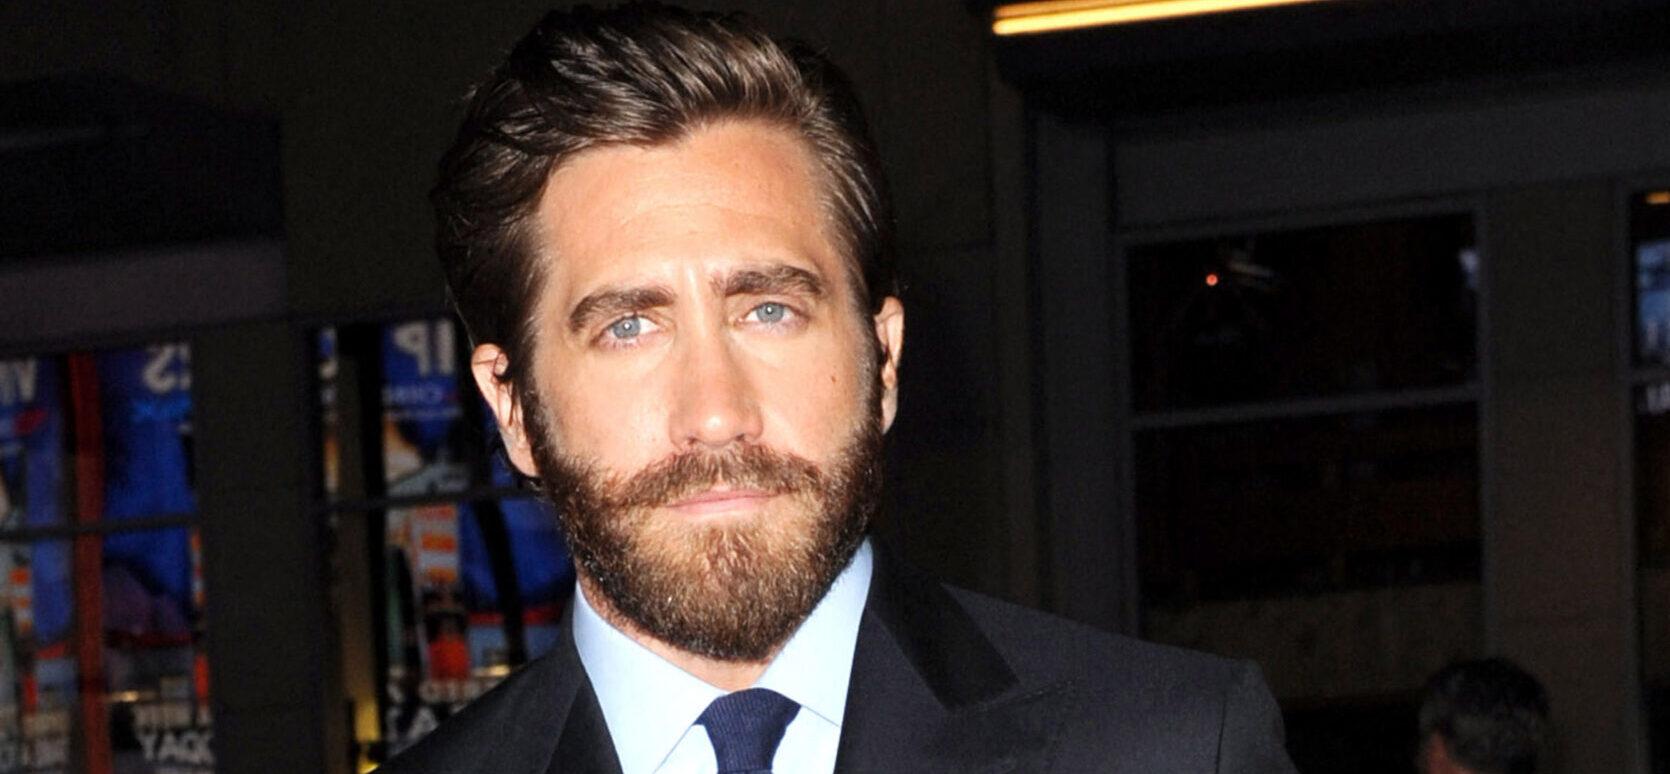 Jake Gyllenhaal’s Dad, Stephen, Files For Divorce From Wife Of 11 Years